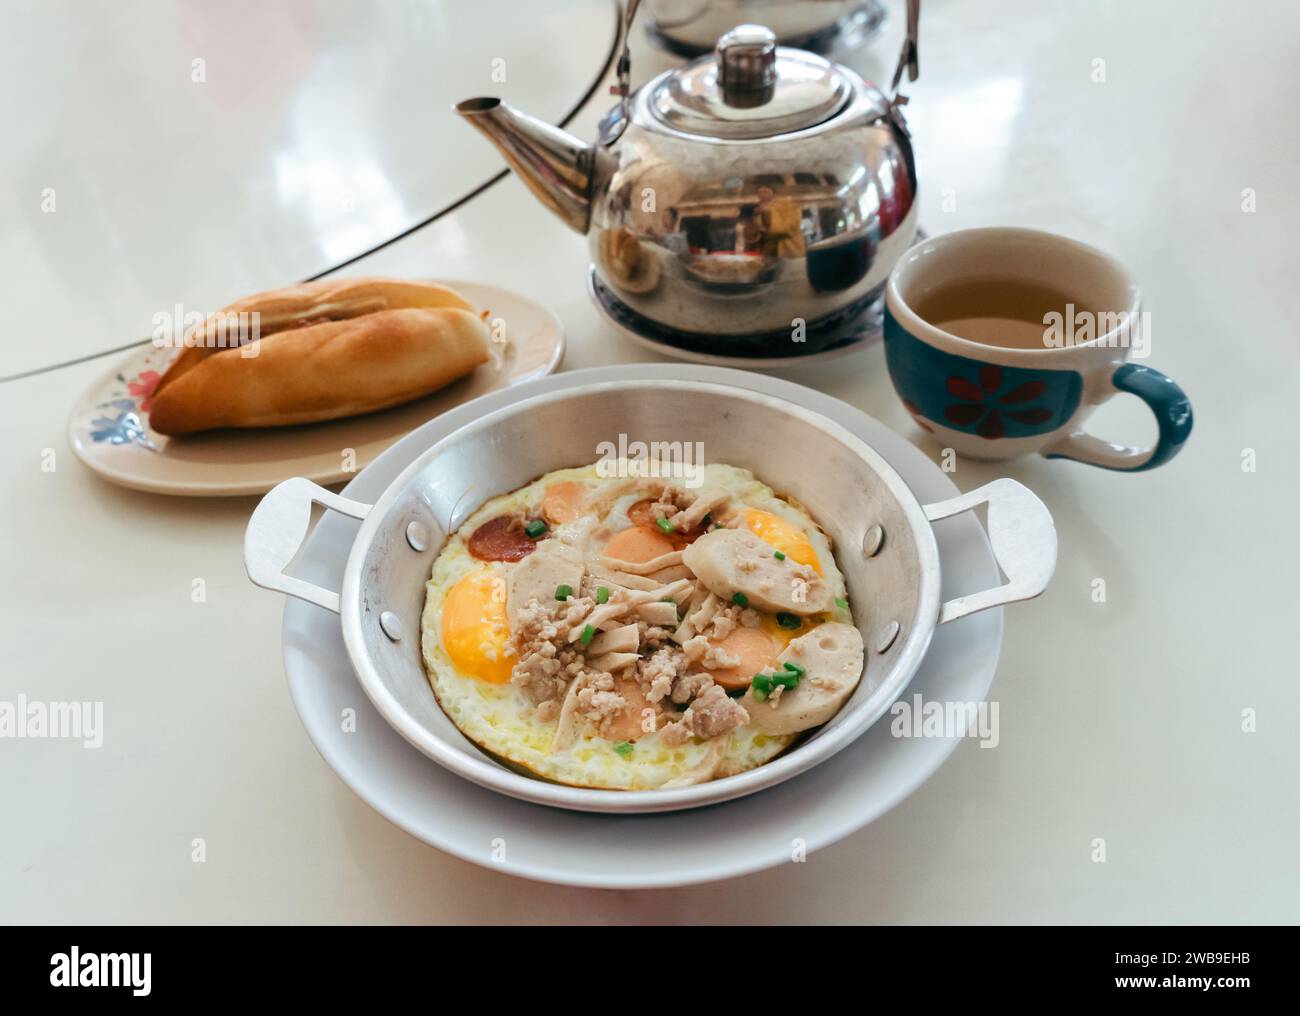 Fried eggs in a small pan with pork and sausages serving on table with Banh mi pork and pickles Vietnamese sandwich and Chinese tea pot. Flat lay food Stock Photo